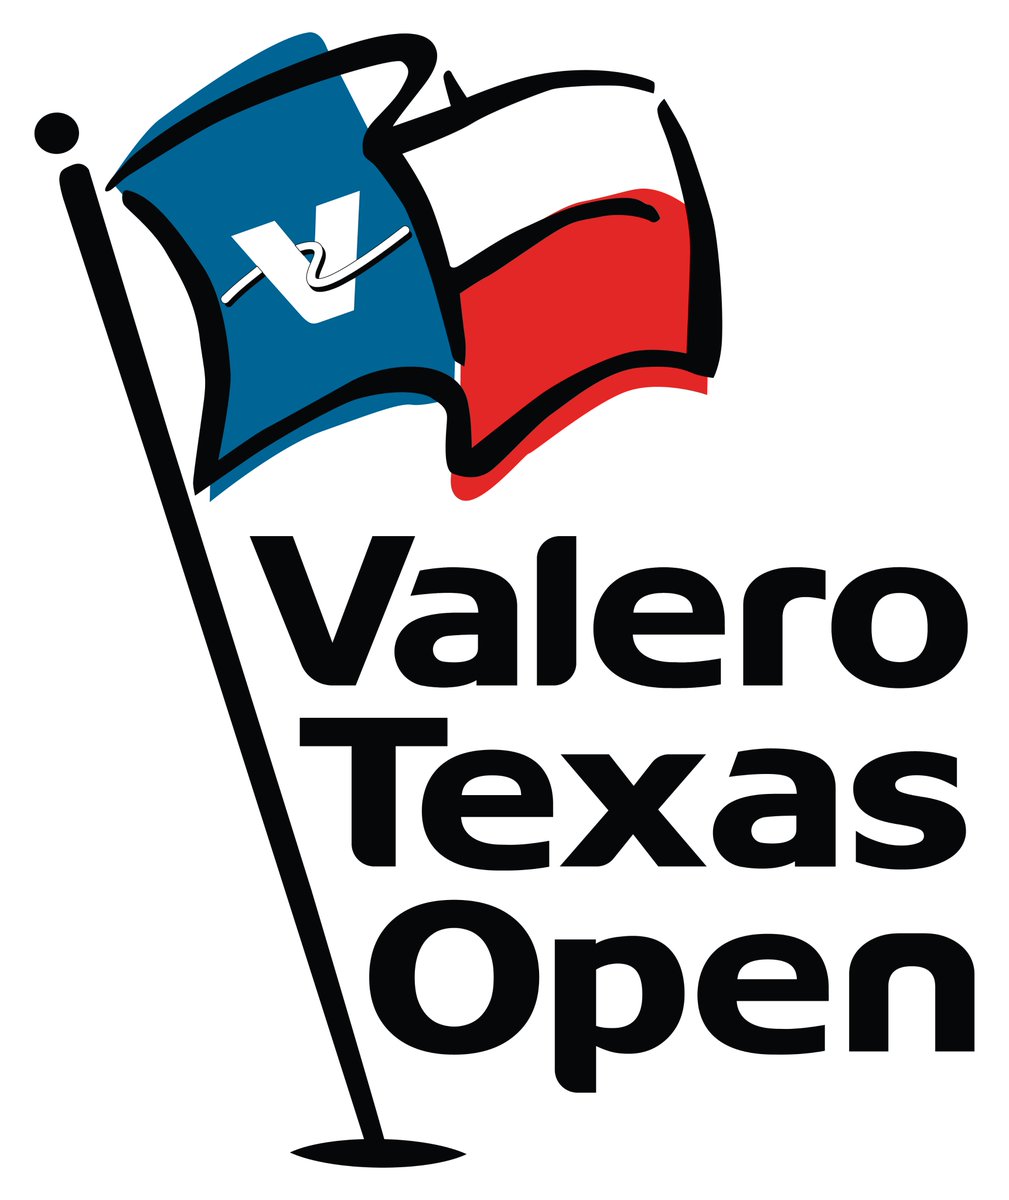 Valero Texas Open Agronomy Volunteers!!!! Attached is the link to sign up for the 2023 Valero Texas Open Agronomy Volunteer Program!! Lodging, Travel stipend, Great Food, PGA Tour operations and networking! Sign up Today!! events.trustevent.com/index.cfm?eid=…